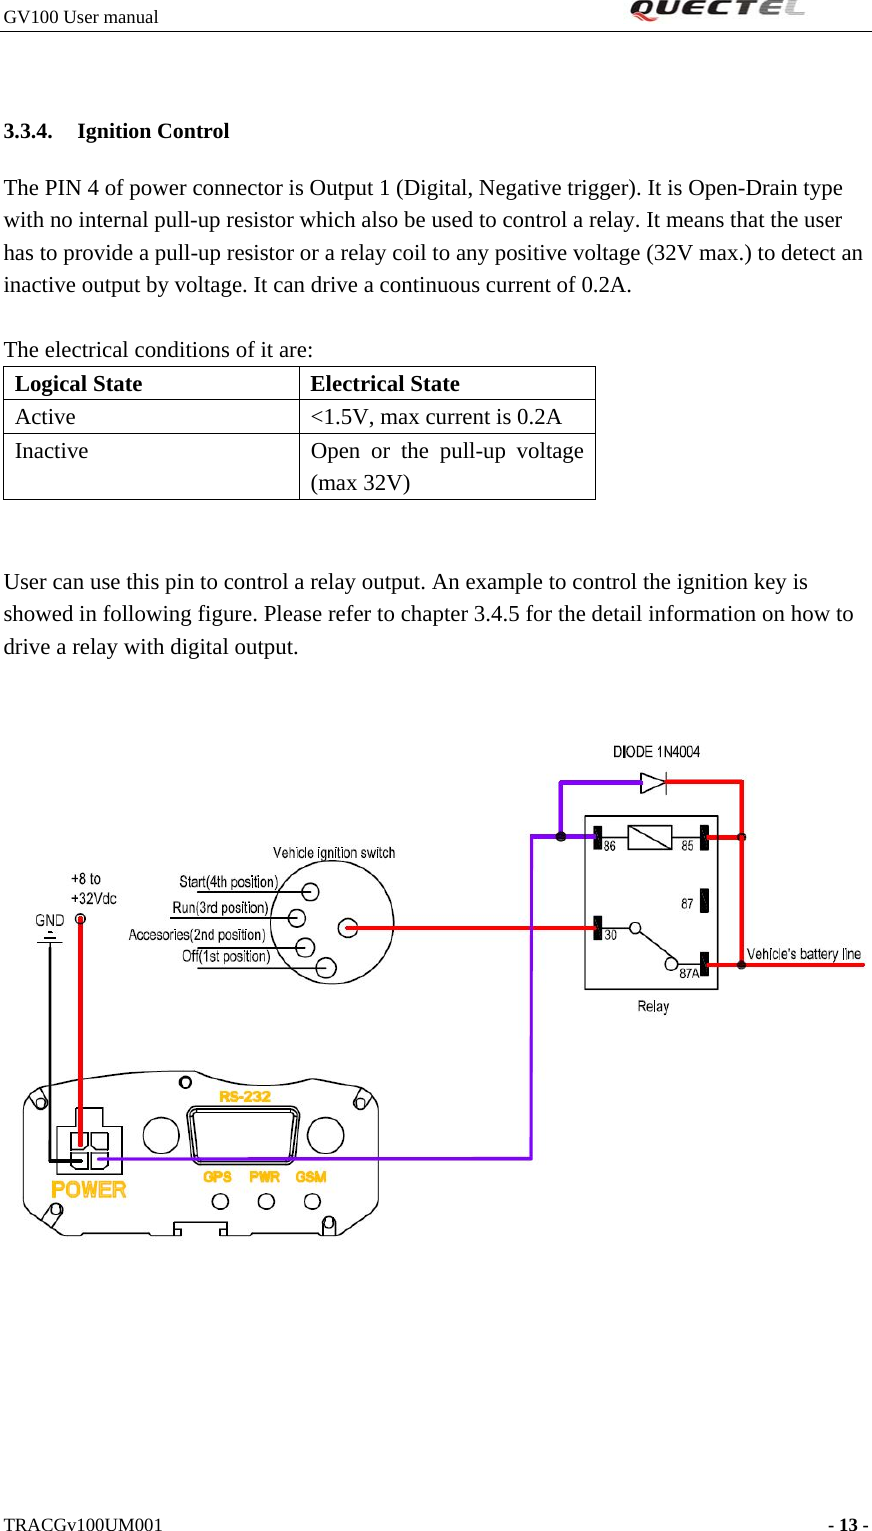 GV100 User manual                                                               3.3.4. Ignition Control The PIN 4 of power connector is Output 1 (Digital, Negative trigger). It is Open-Drain type with no internal pull-up resistor which also be used to control a relay. It means that the user has to provide a pull-up resistor or a relay coil to any positive voltage (32V max.) to detect an inactive output by voltage. It can drive a continuous current of 0.2A.  The electrical conditions of it are: Logical State  Electrical State Active  &lt;1.5V, max current is 0.2A Inactive  Open or the pull-up voltage (max 32V)   User can use this pin to control a relay output. An example to control the ignition key is showed in following figure. Please refer to chapter 3.4.5 for the detail information on how to drive a relay with digital output.        TRACGv100UM001                                                                    - 13 -   